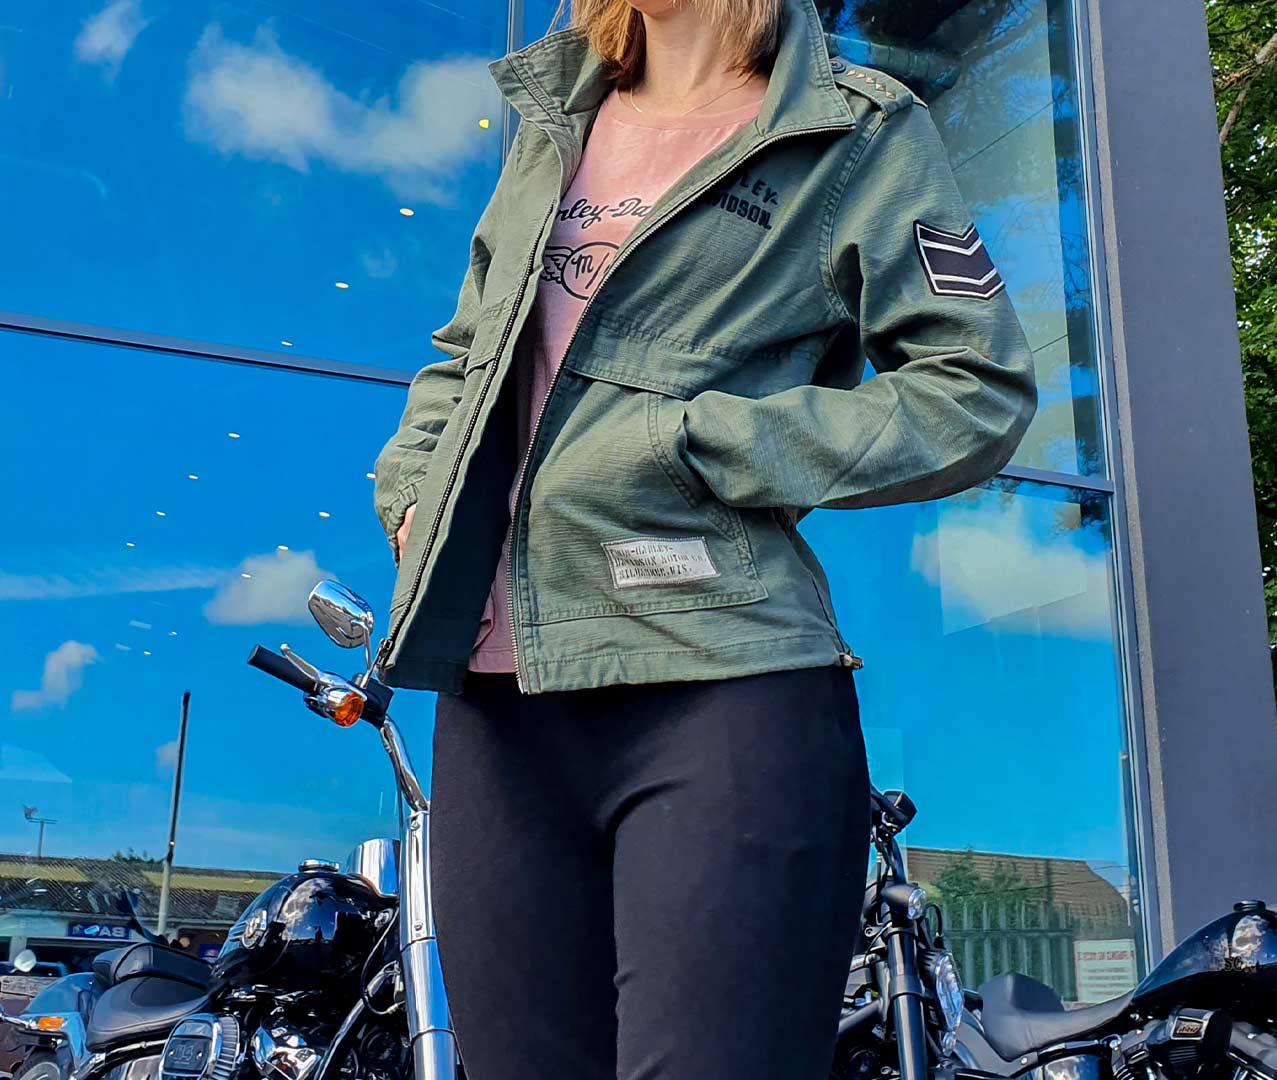 GET THE LOOK - Harley-Davidson Look Two